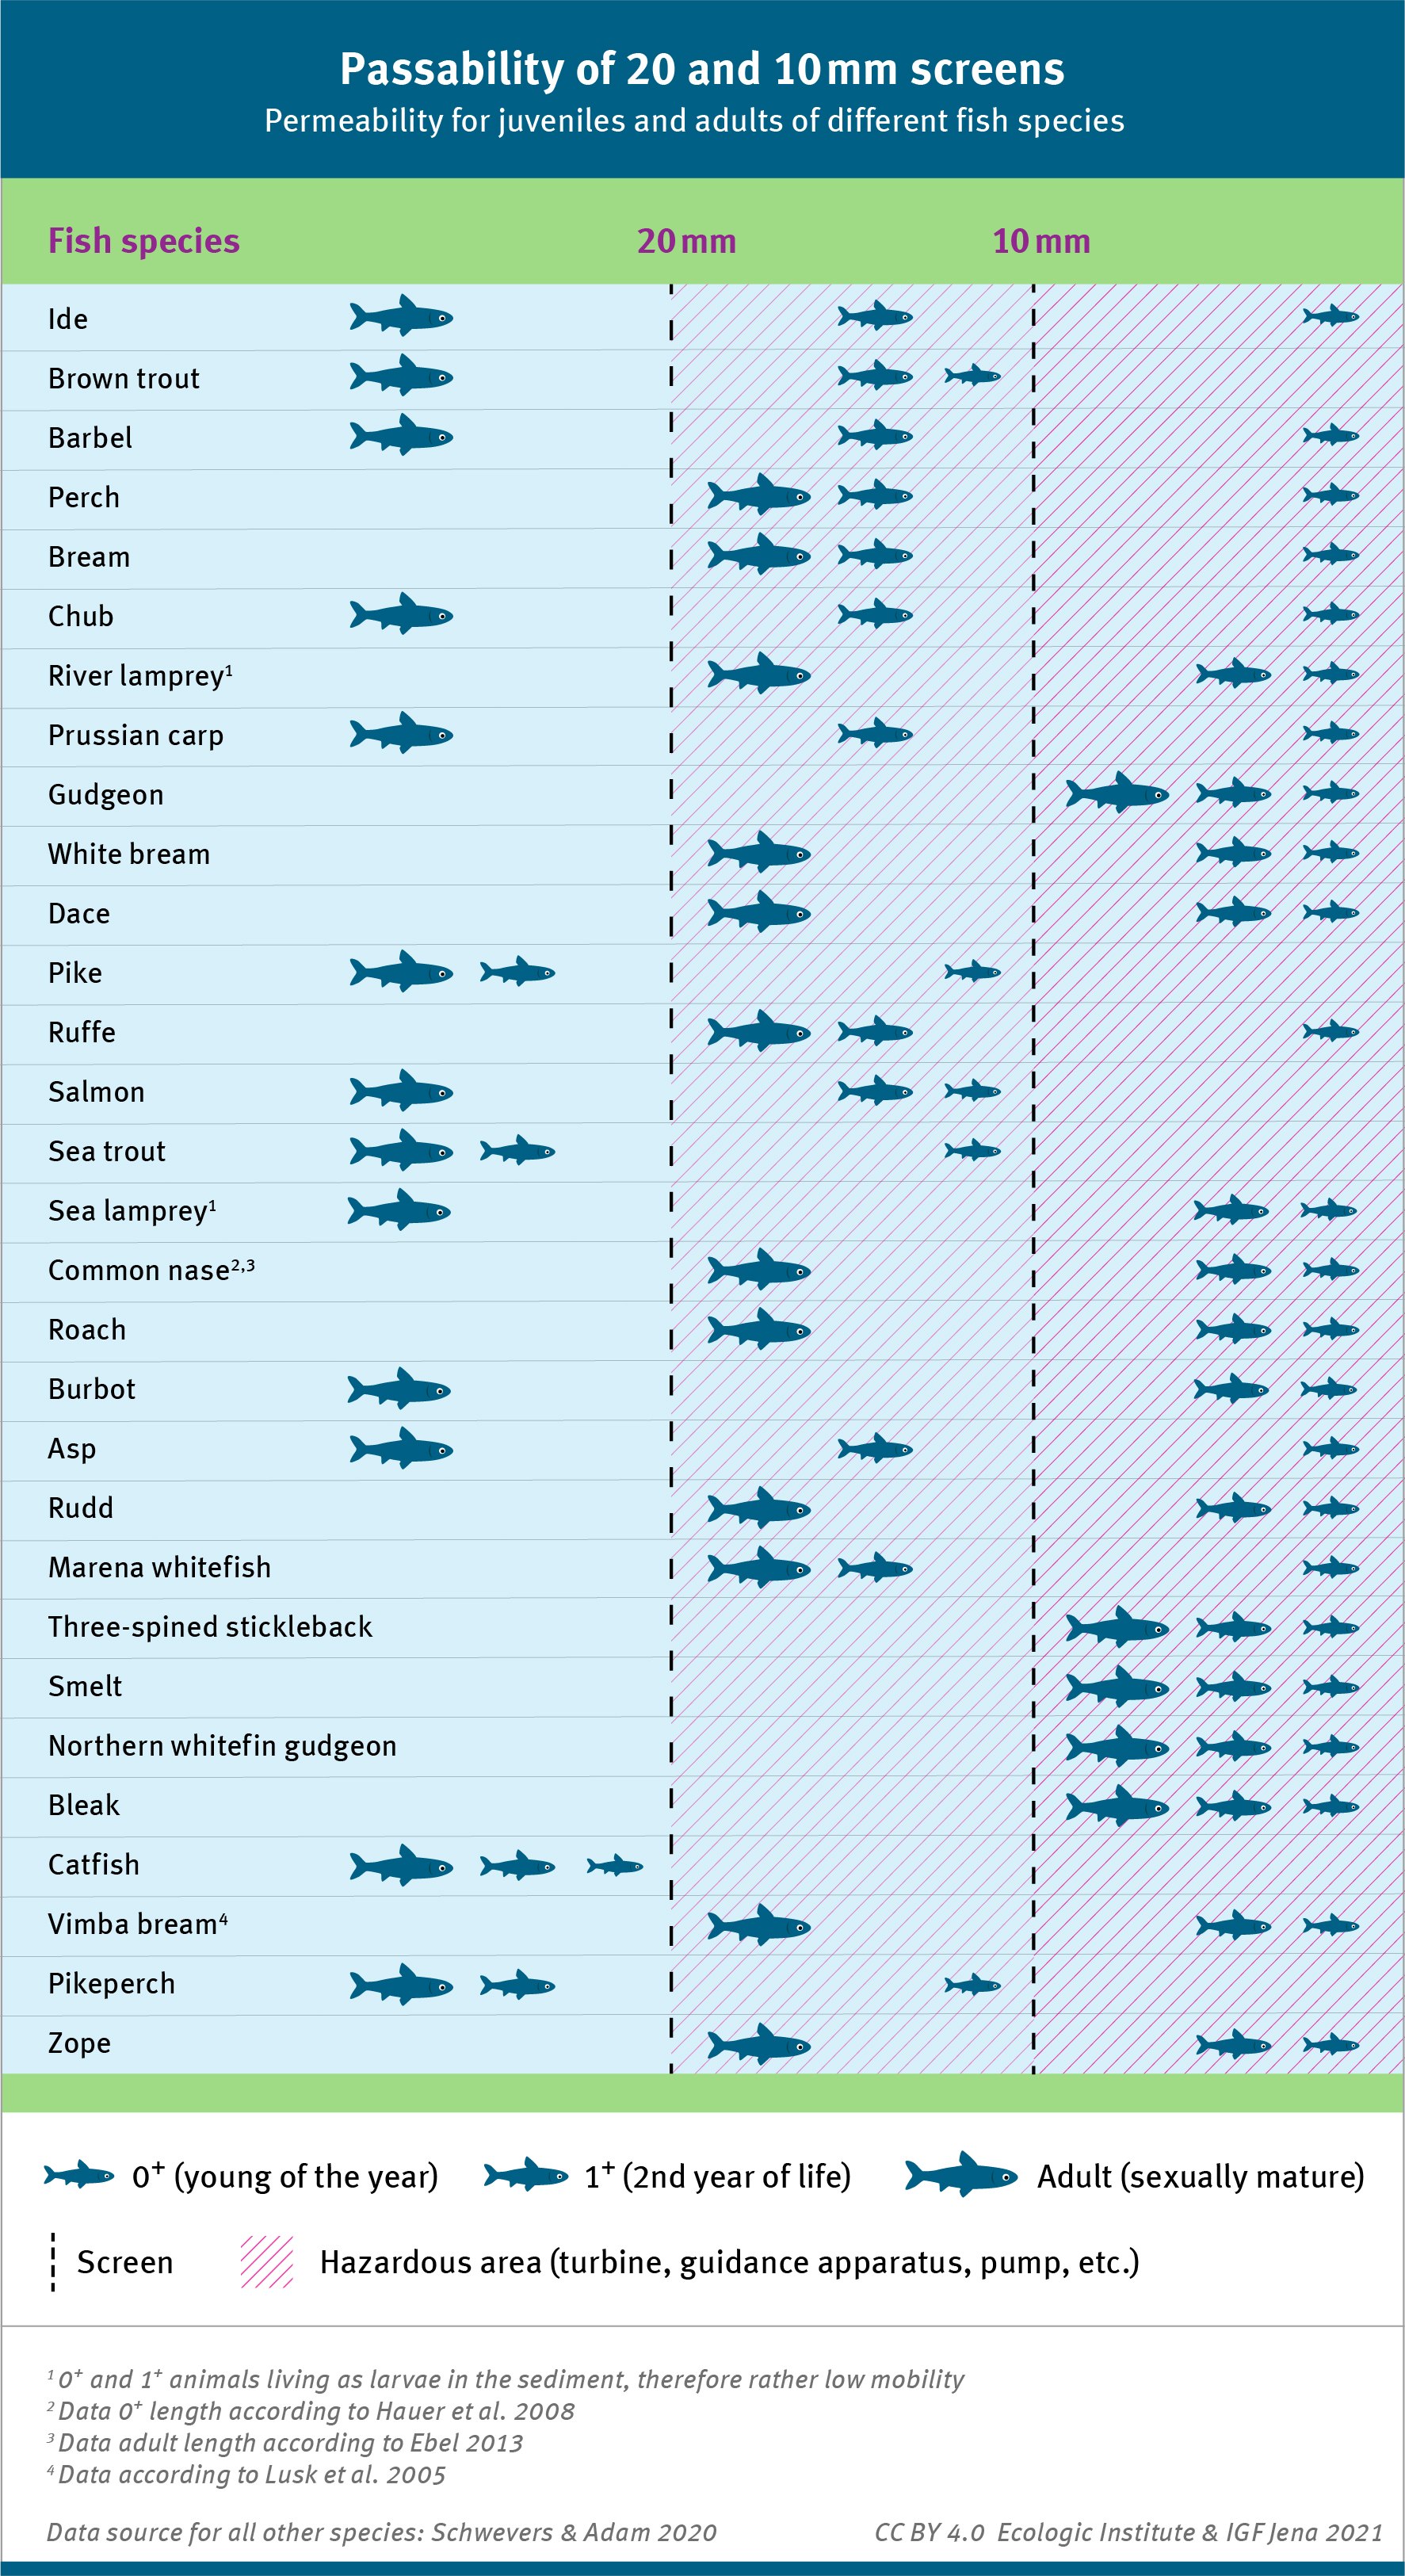 Table, displaying the permeability for juveniles and adults of different fish species